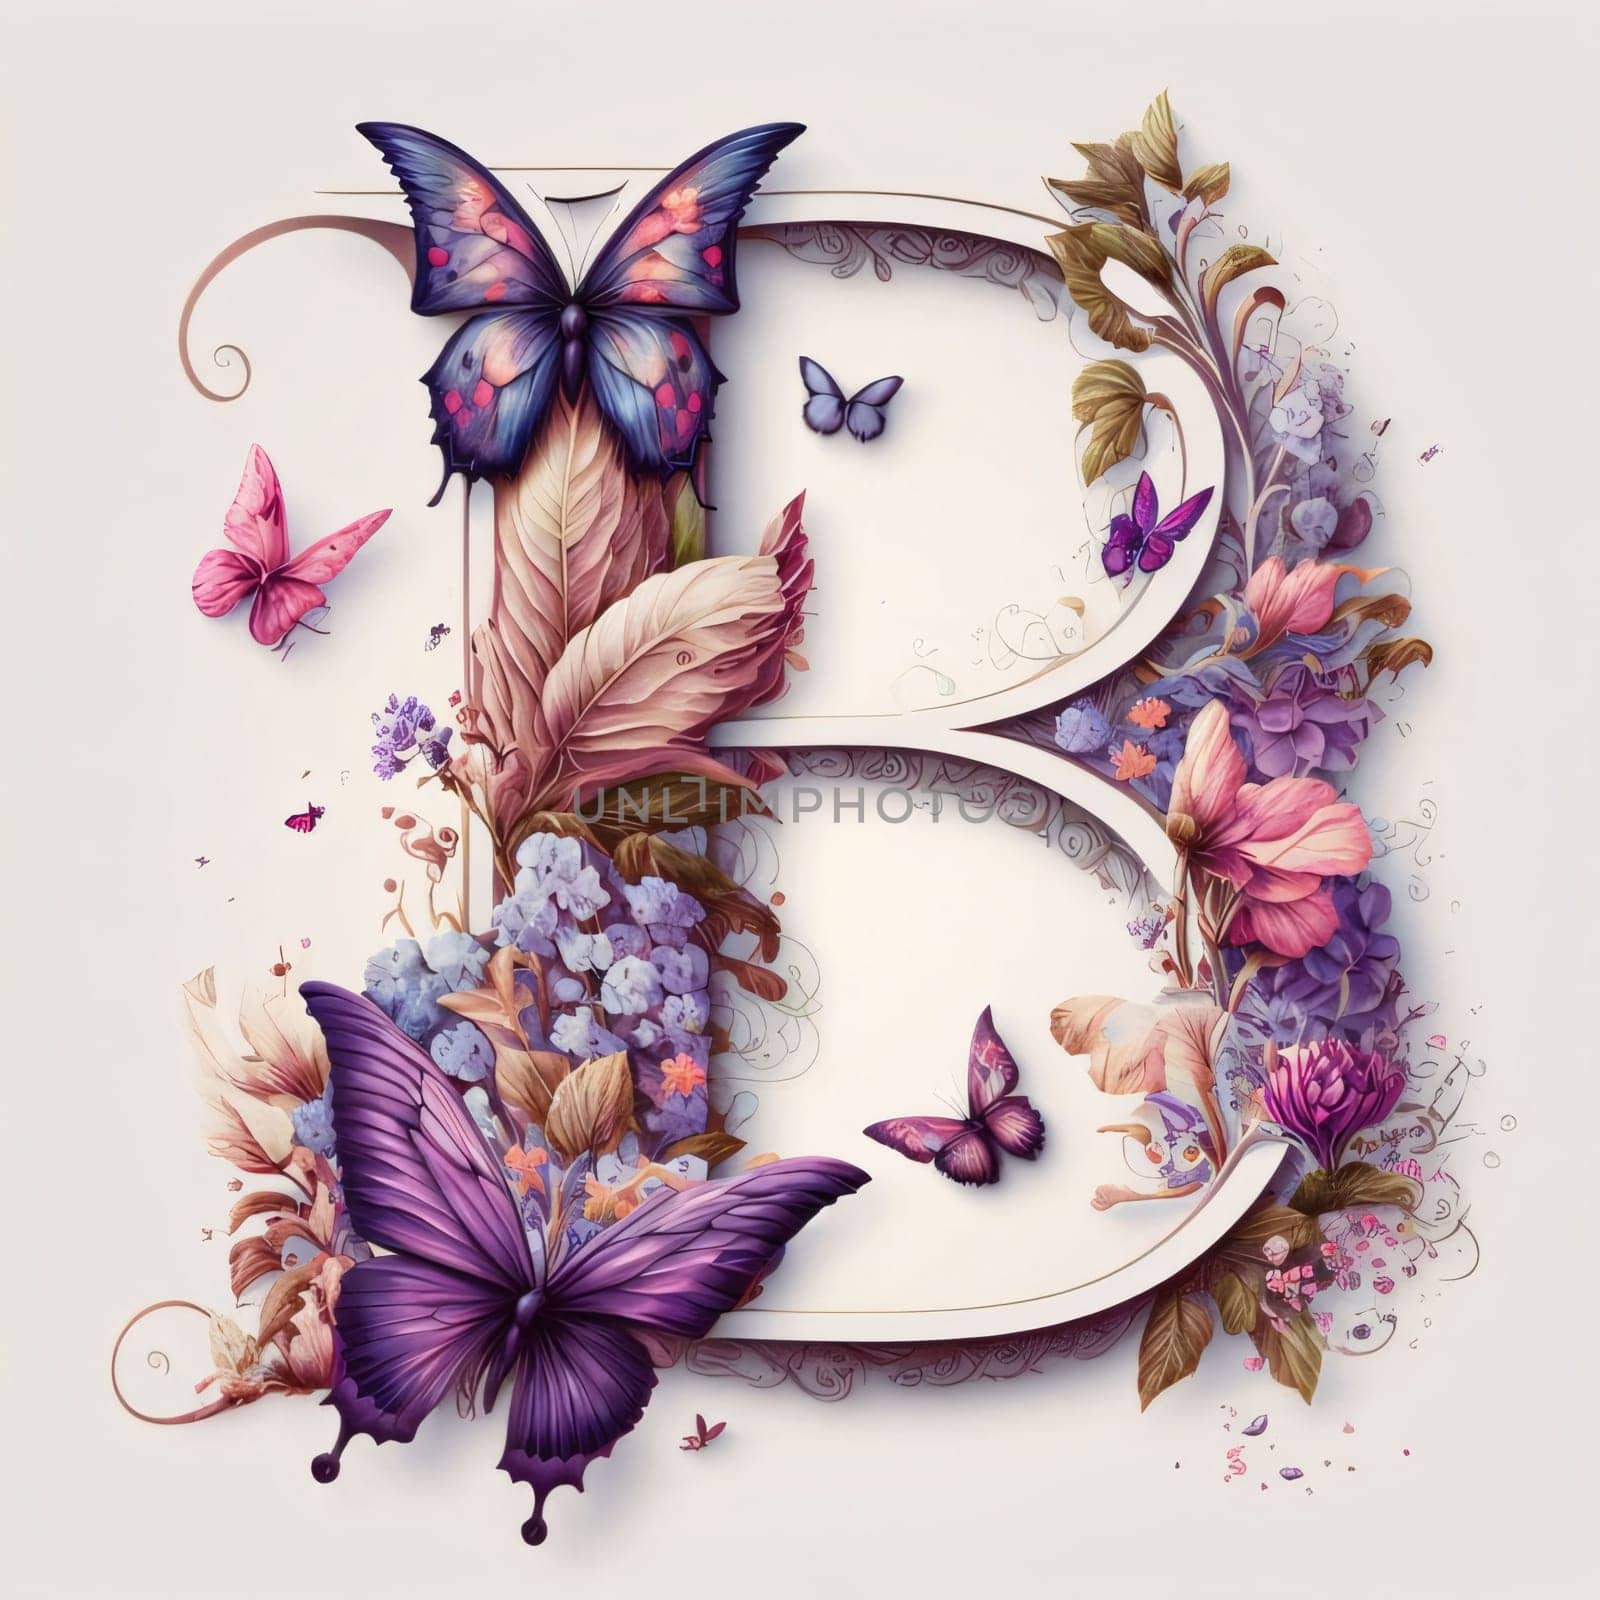 Graphic alphabet letters: Beautiful letter B with flowers, butterflies and leaves for your design.